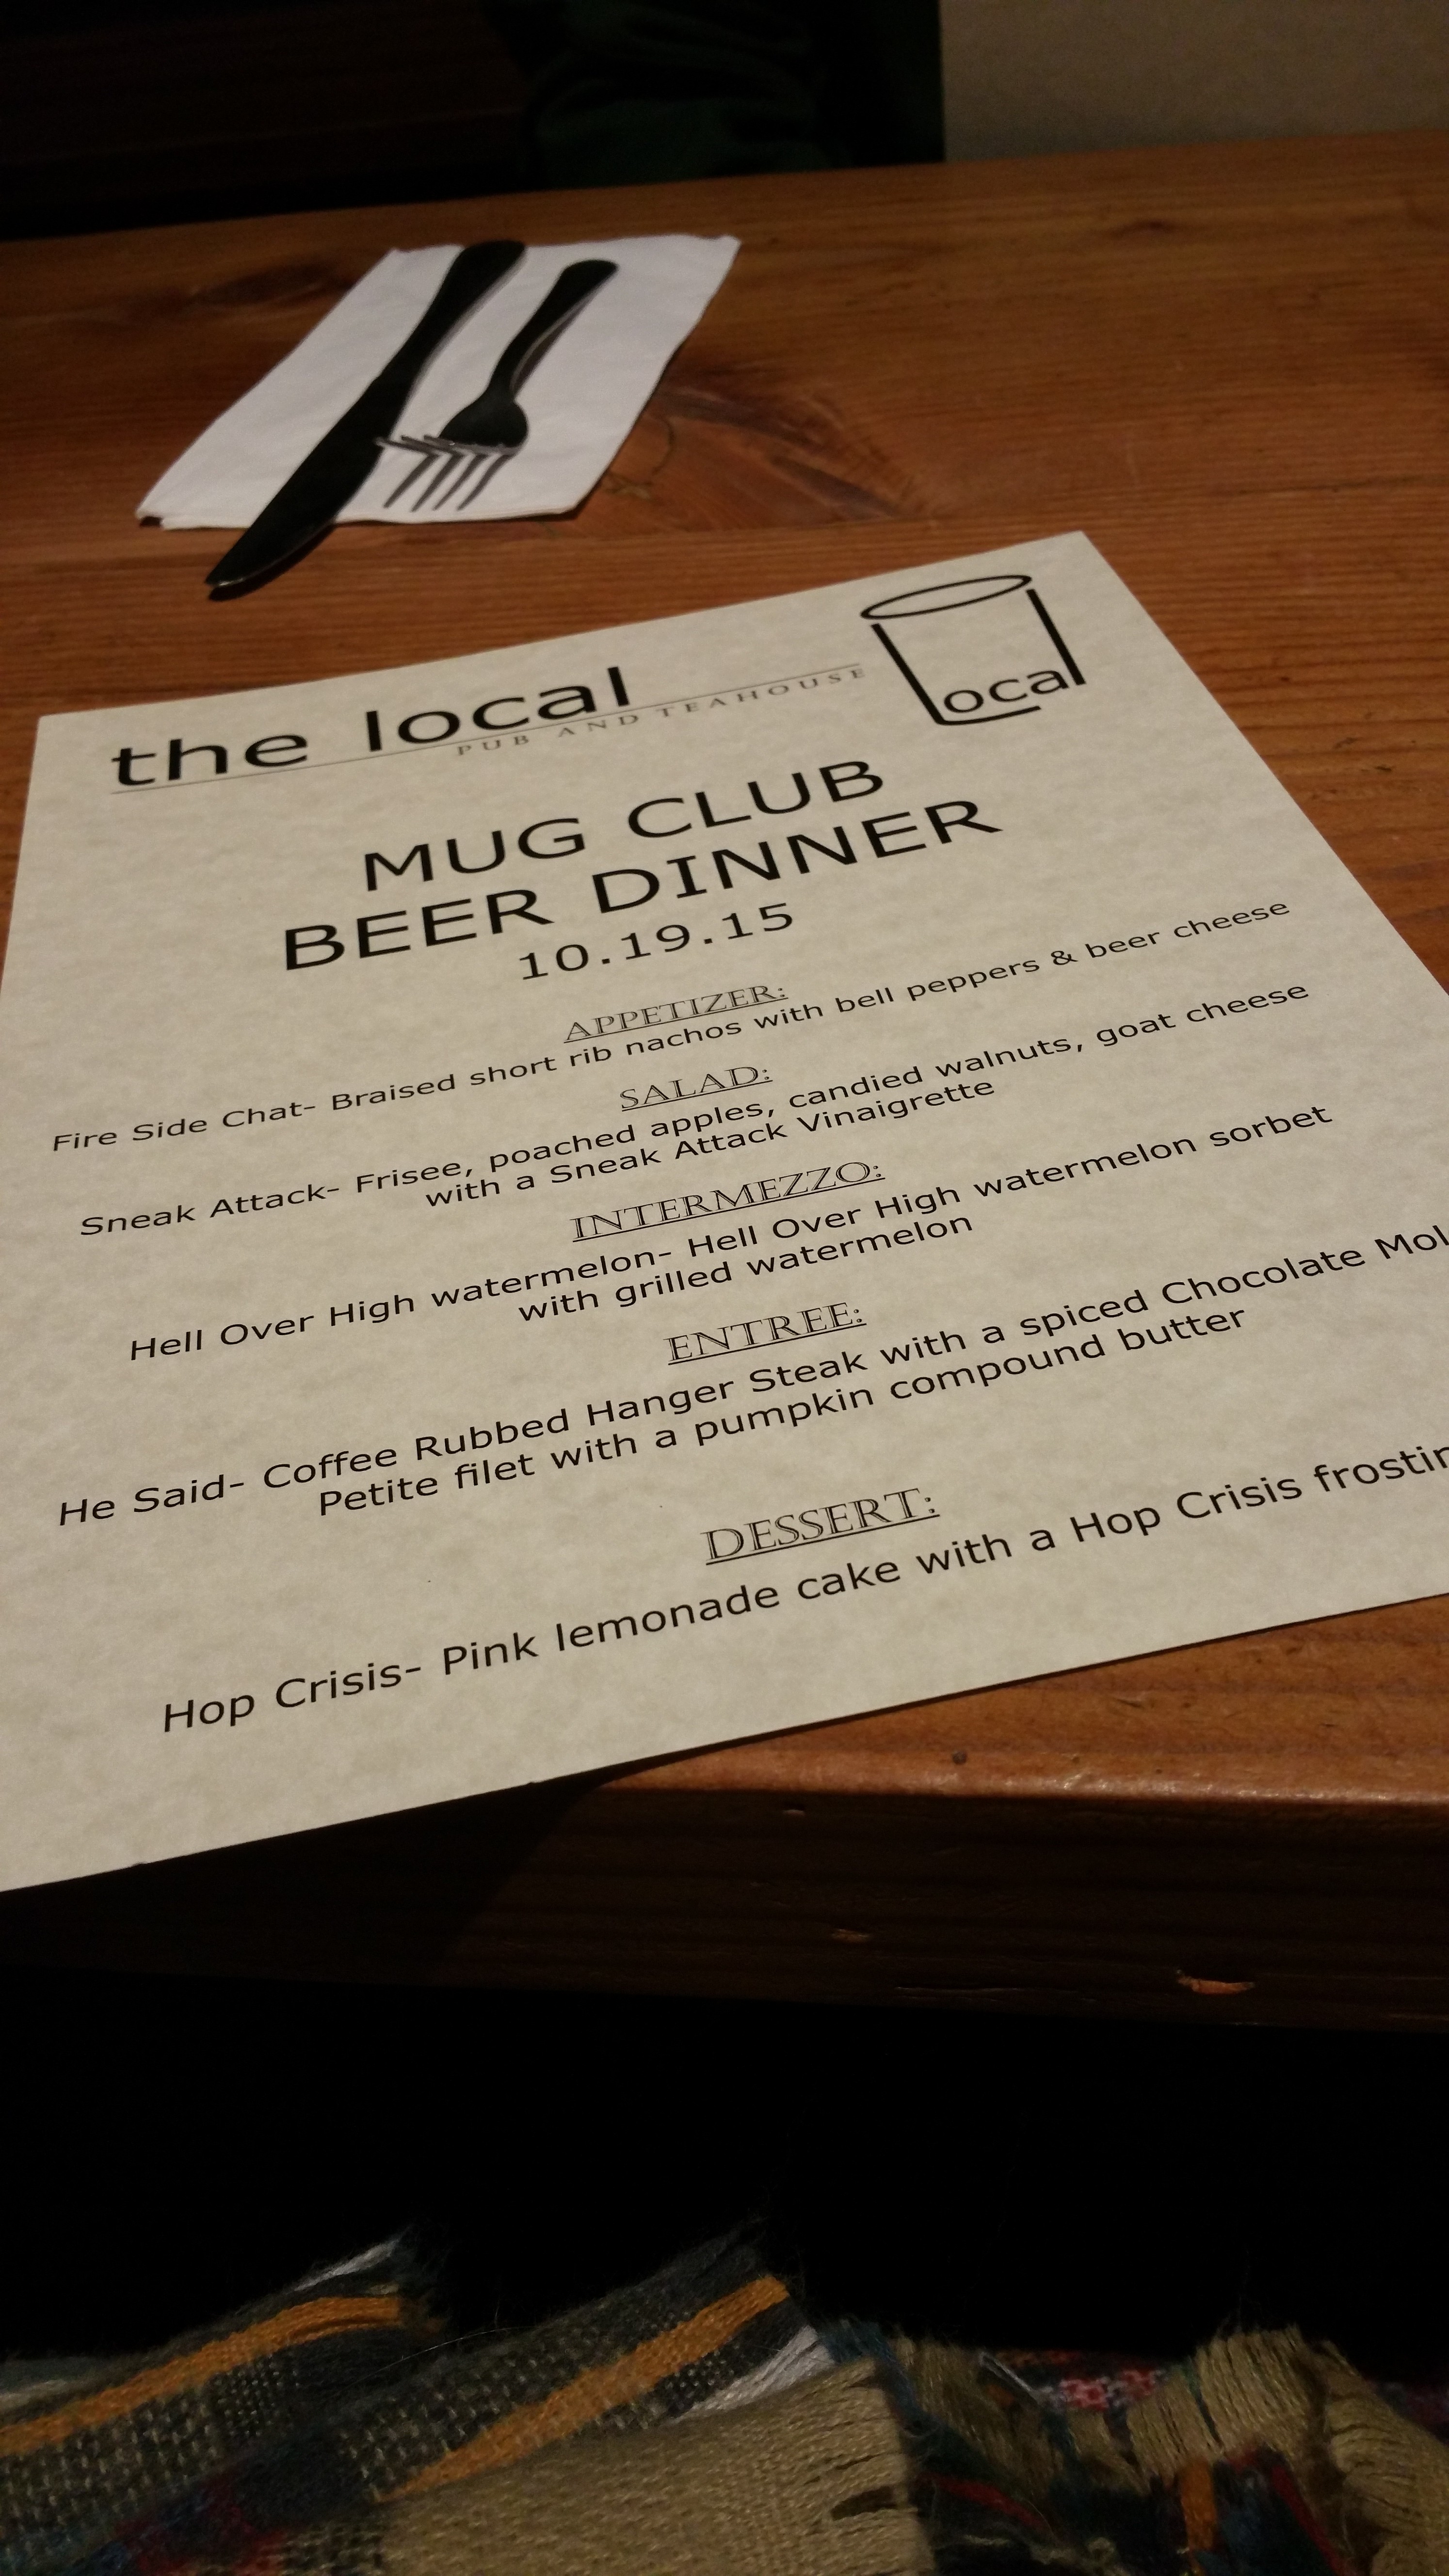 Beer Dinner at The Local